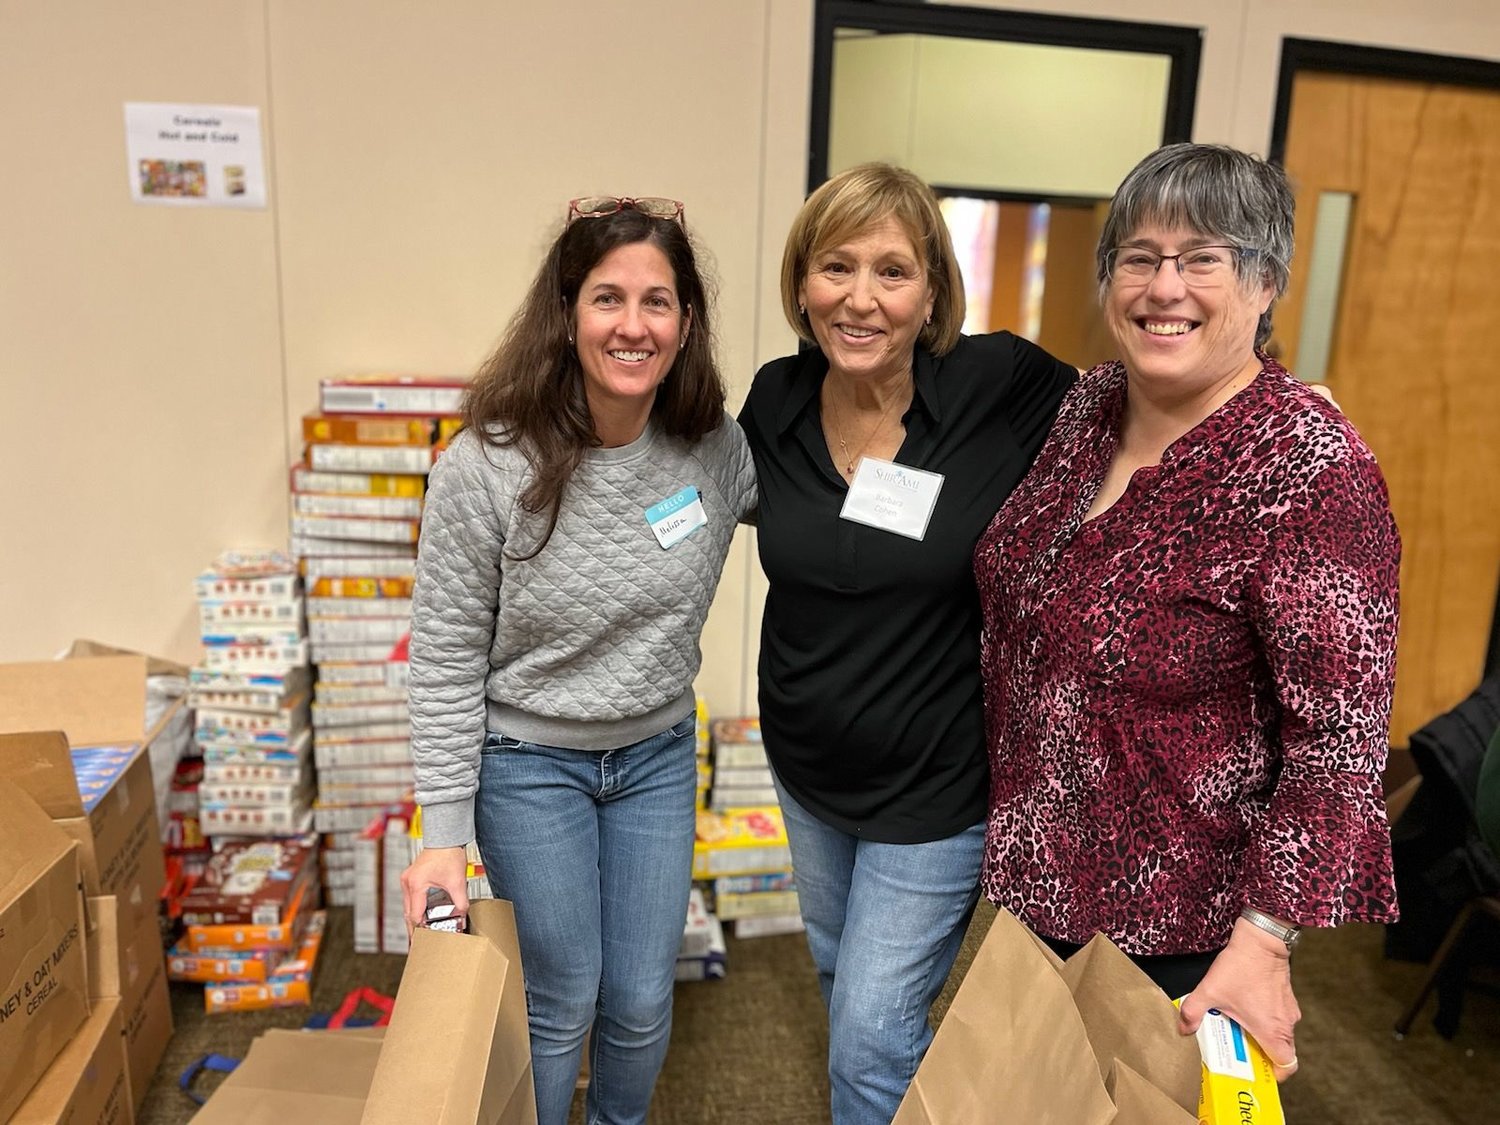 More than 200 volunteers lent a hand at the food sorting and packing event held at Shir Ami Reform Synagogue of Newtown last month. From left are Melissa Riskin of Newtown; Barbara Cohen of Fort Washington; and Donna Desantis of Langhorne.